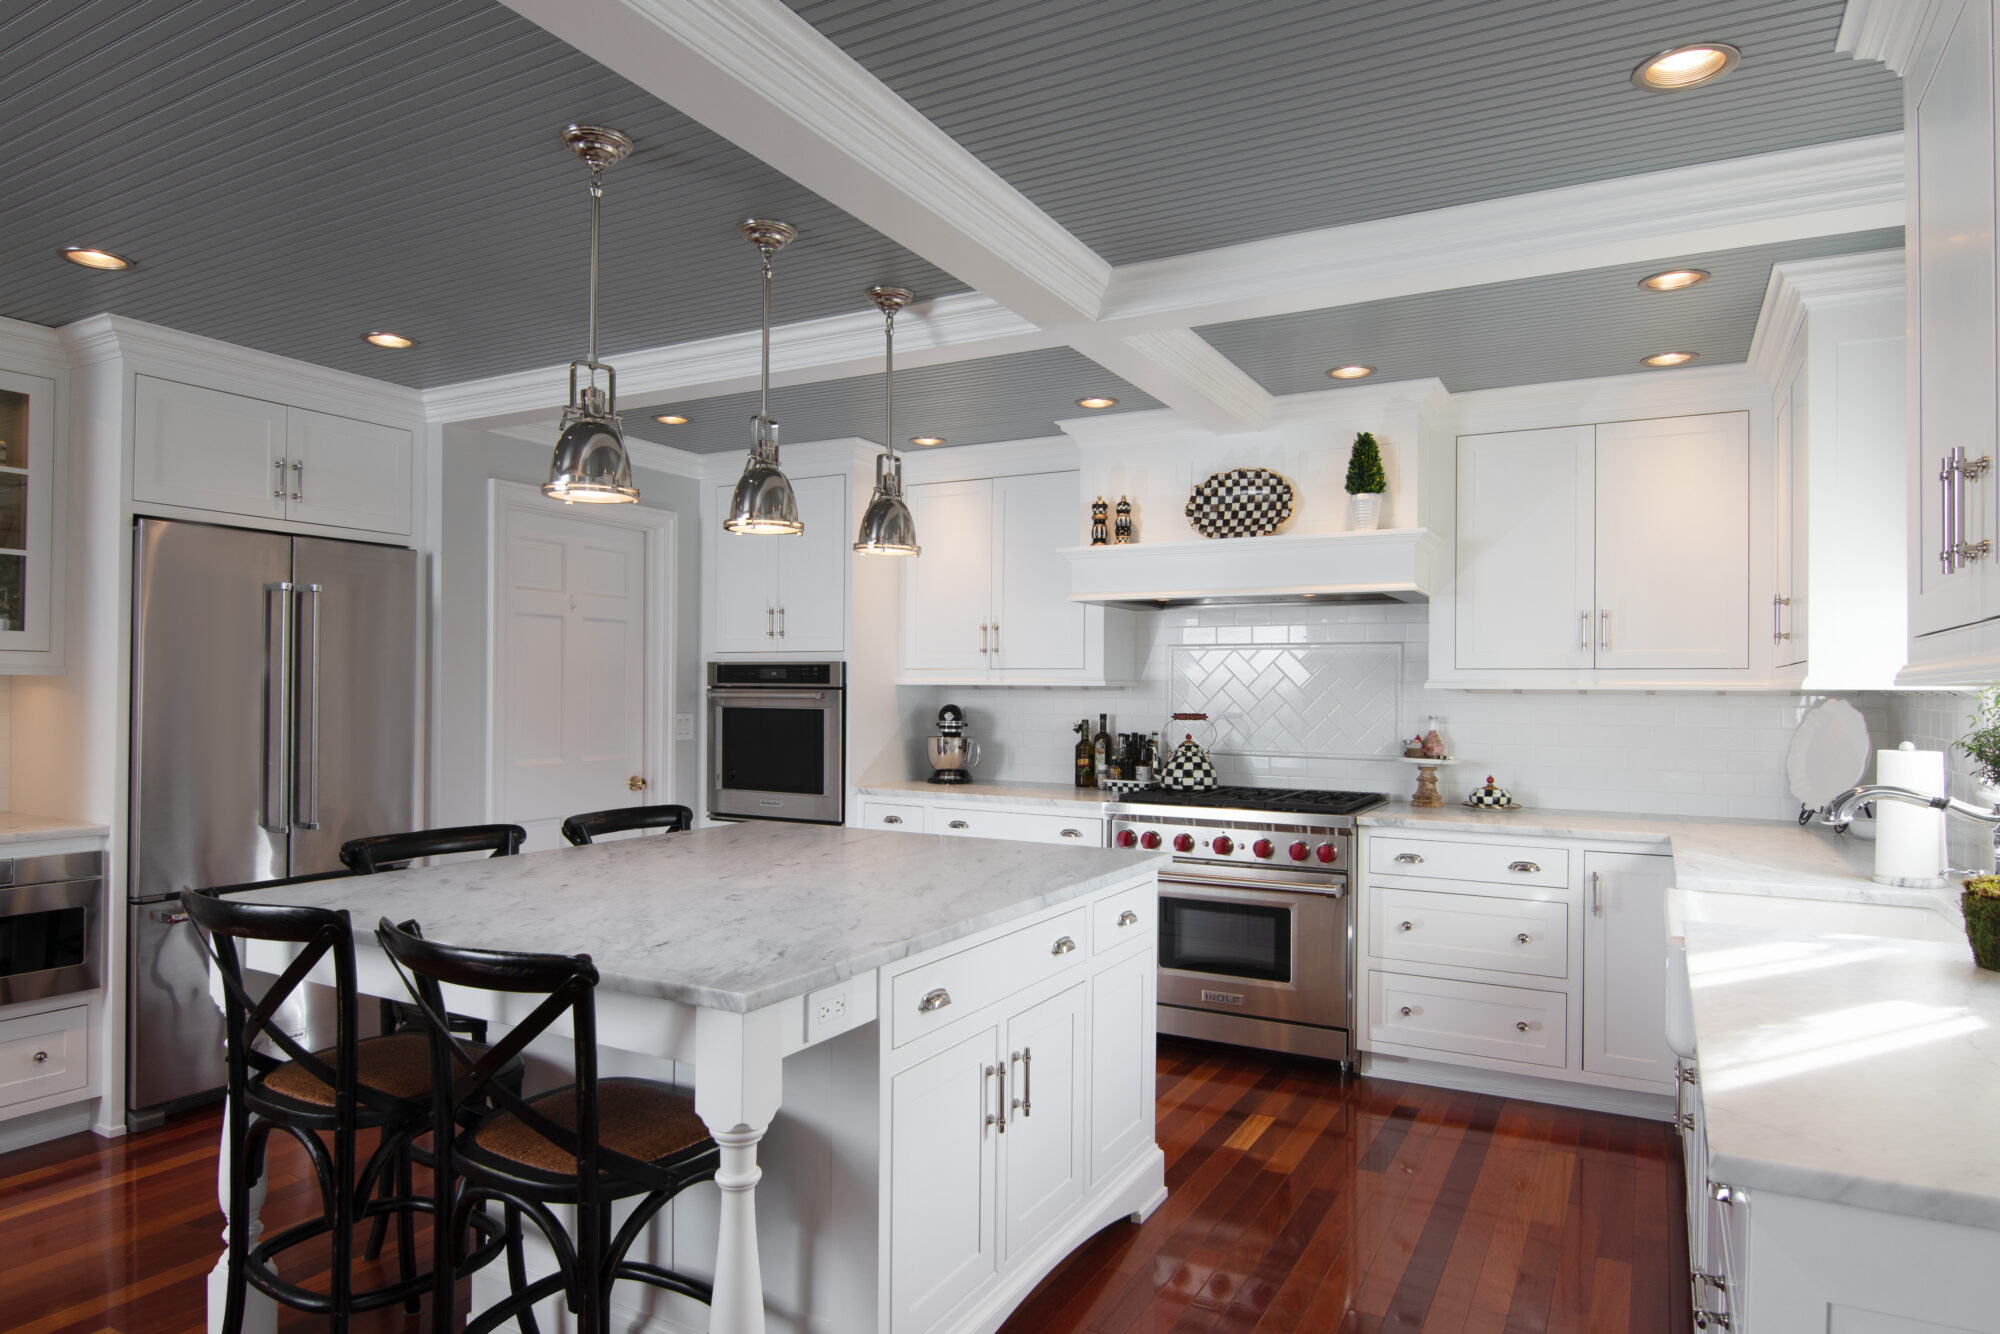 "R.E. McNamara's stunning kitchen transformation with bright white cabinets, elegant hardwood floors, and contemporary stainless steel appliances.